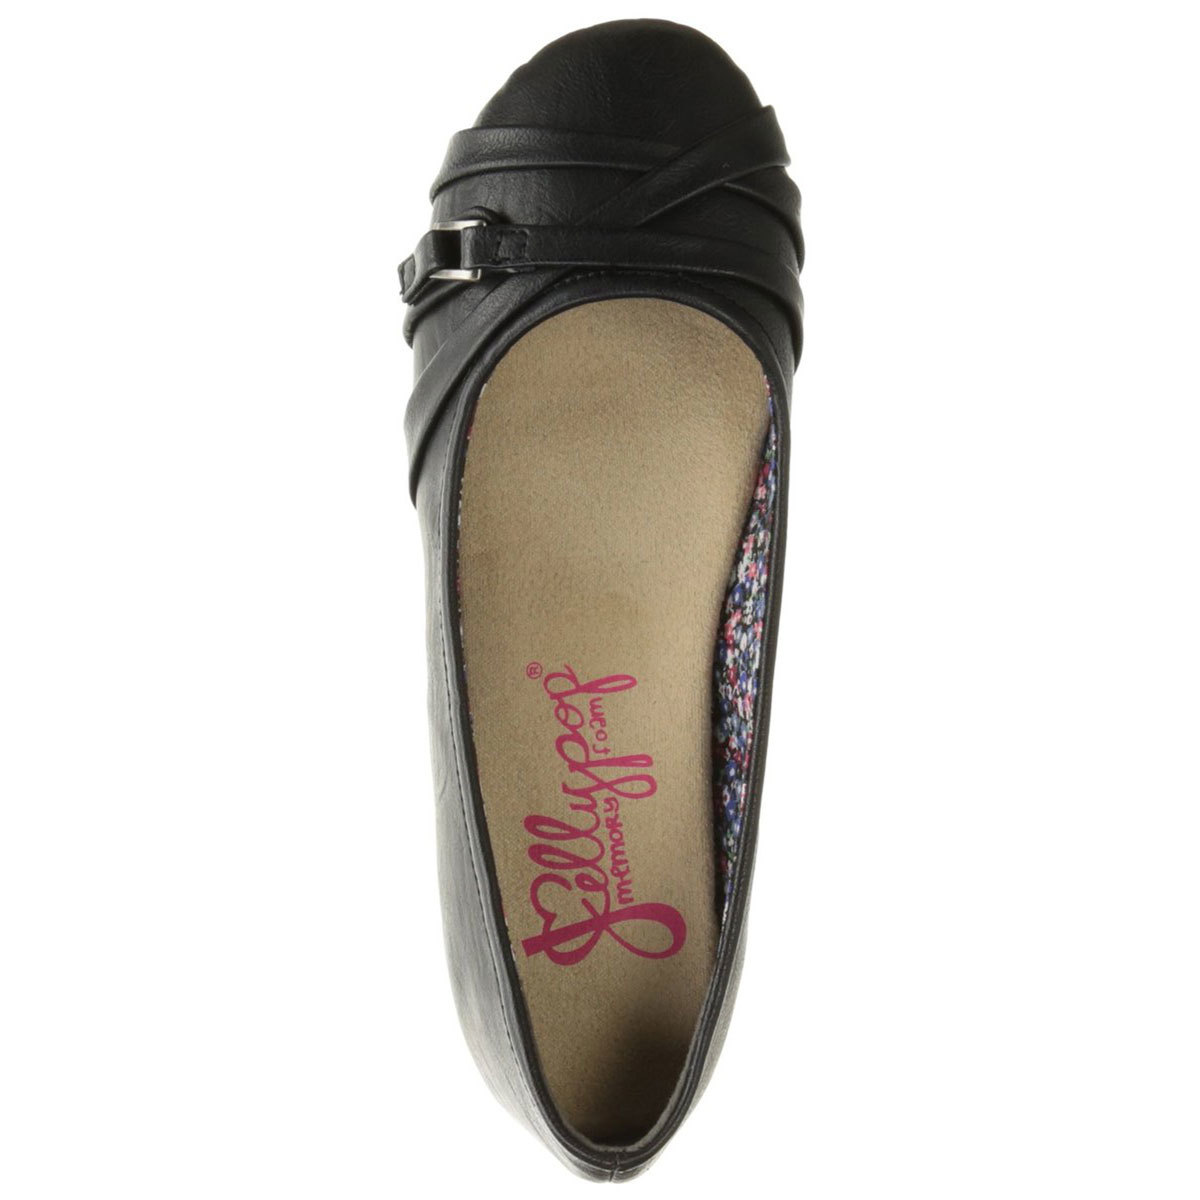 jellypop shoes clearance